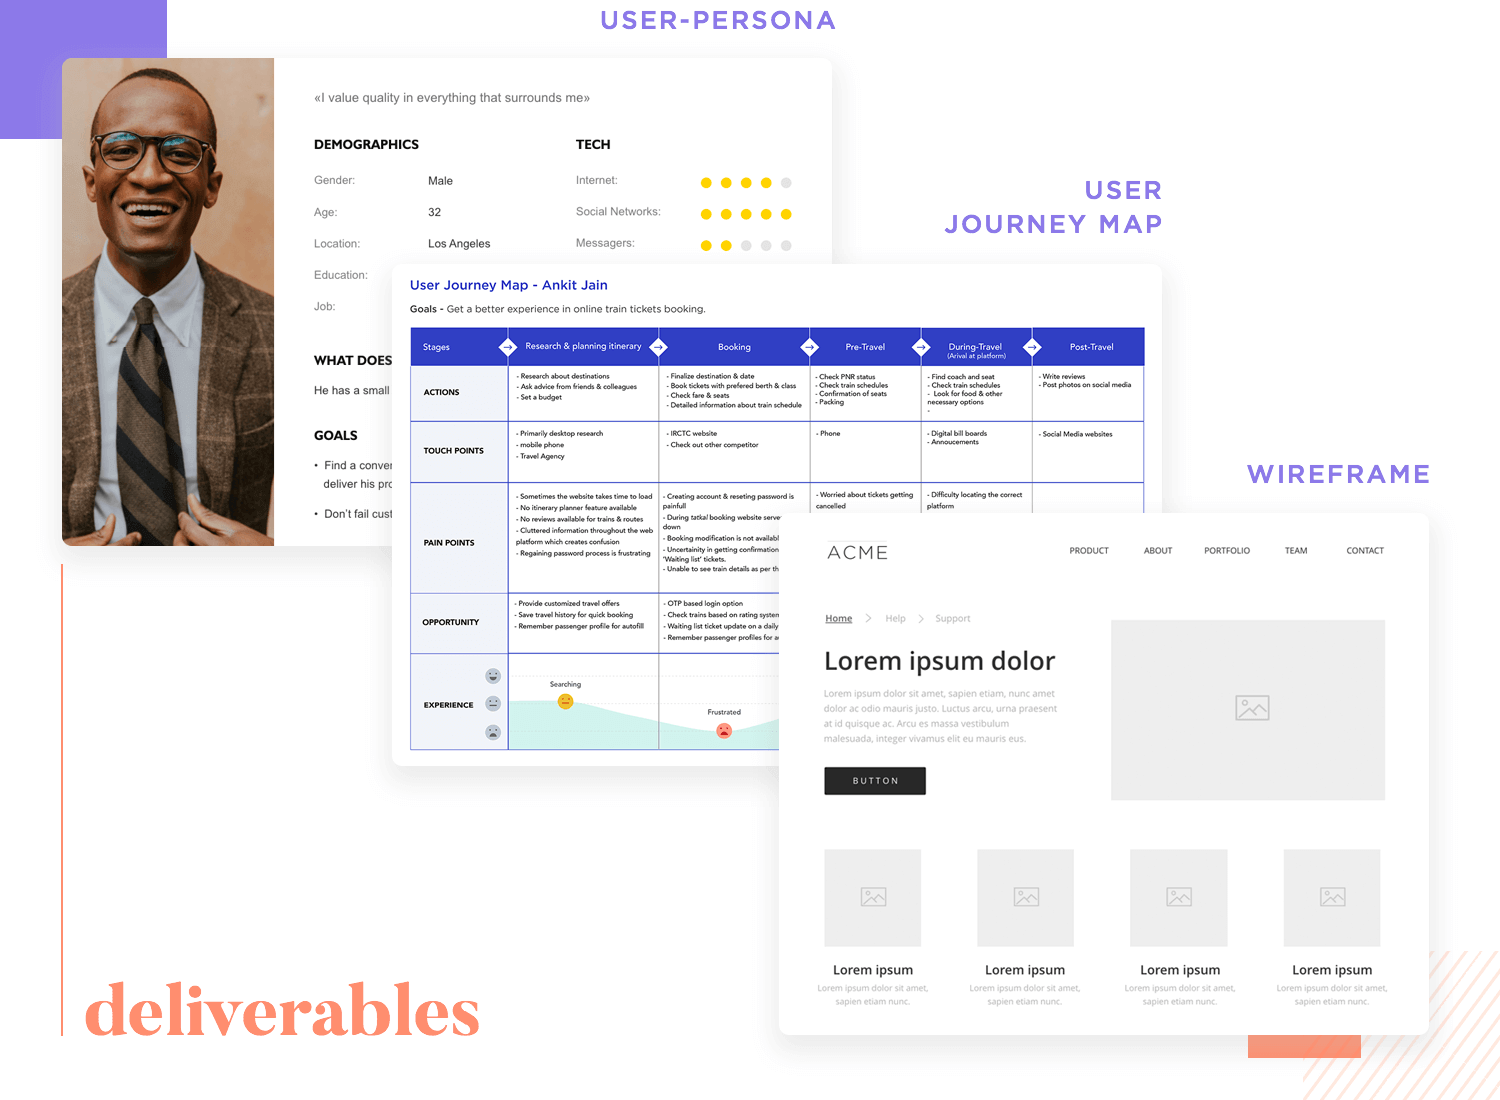 ux design deliverables including wireframes, user personas and journey maps